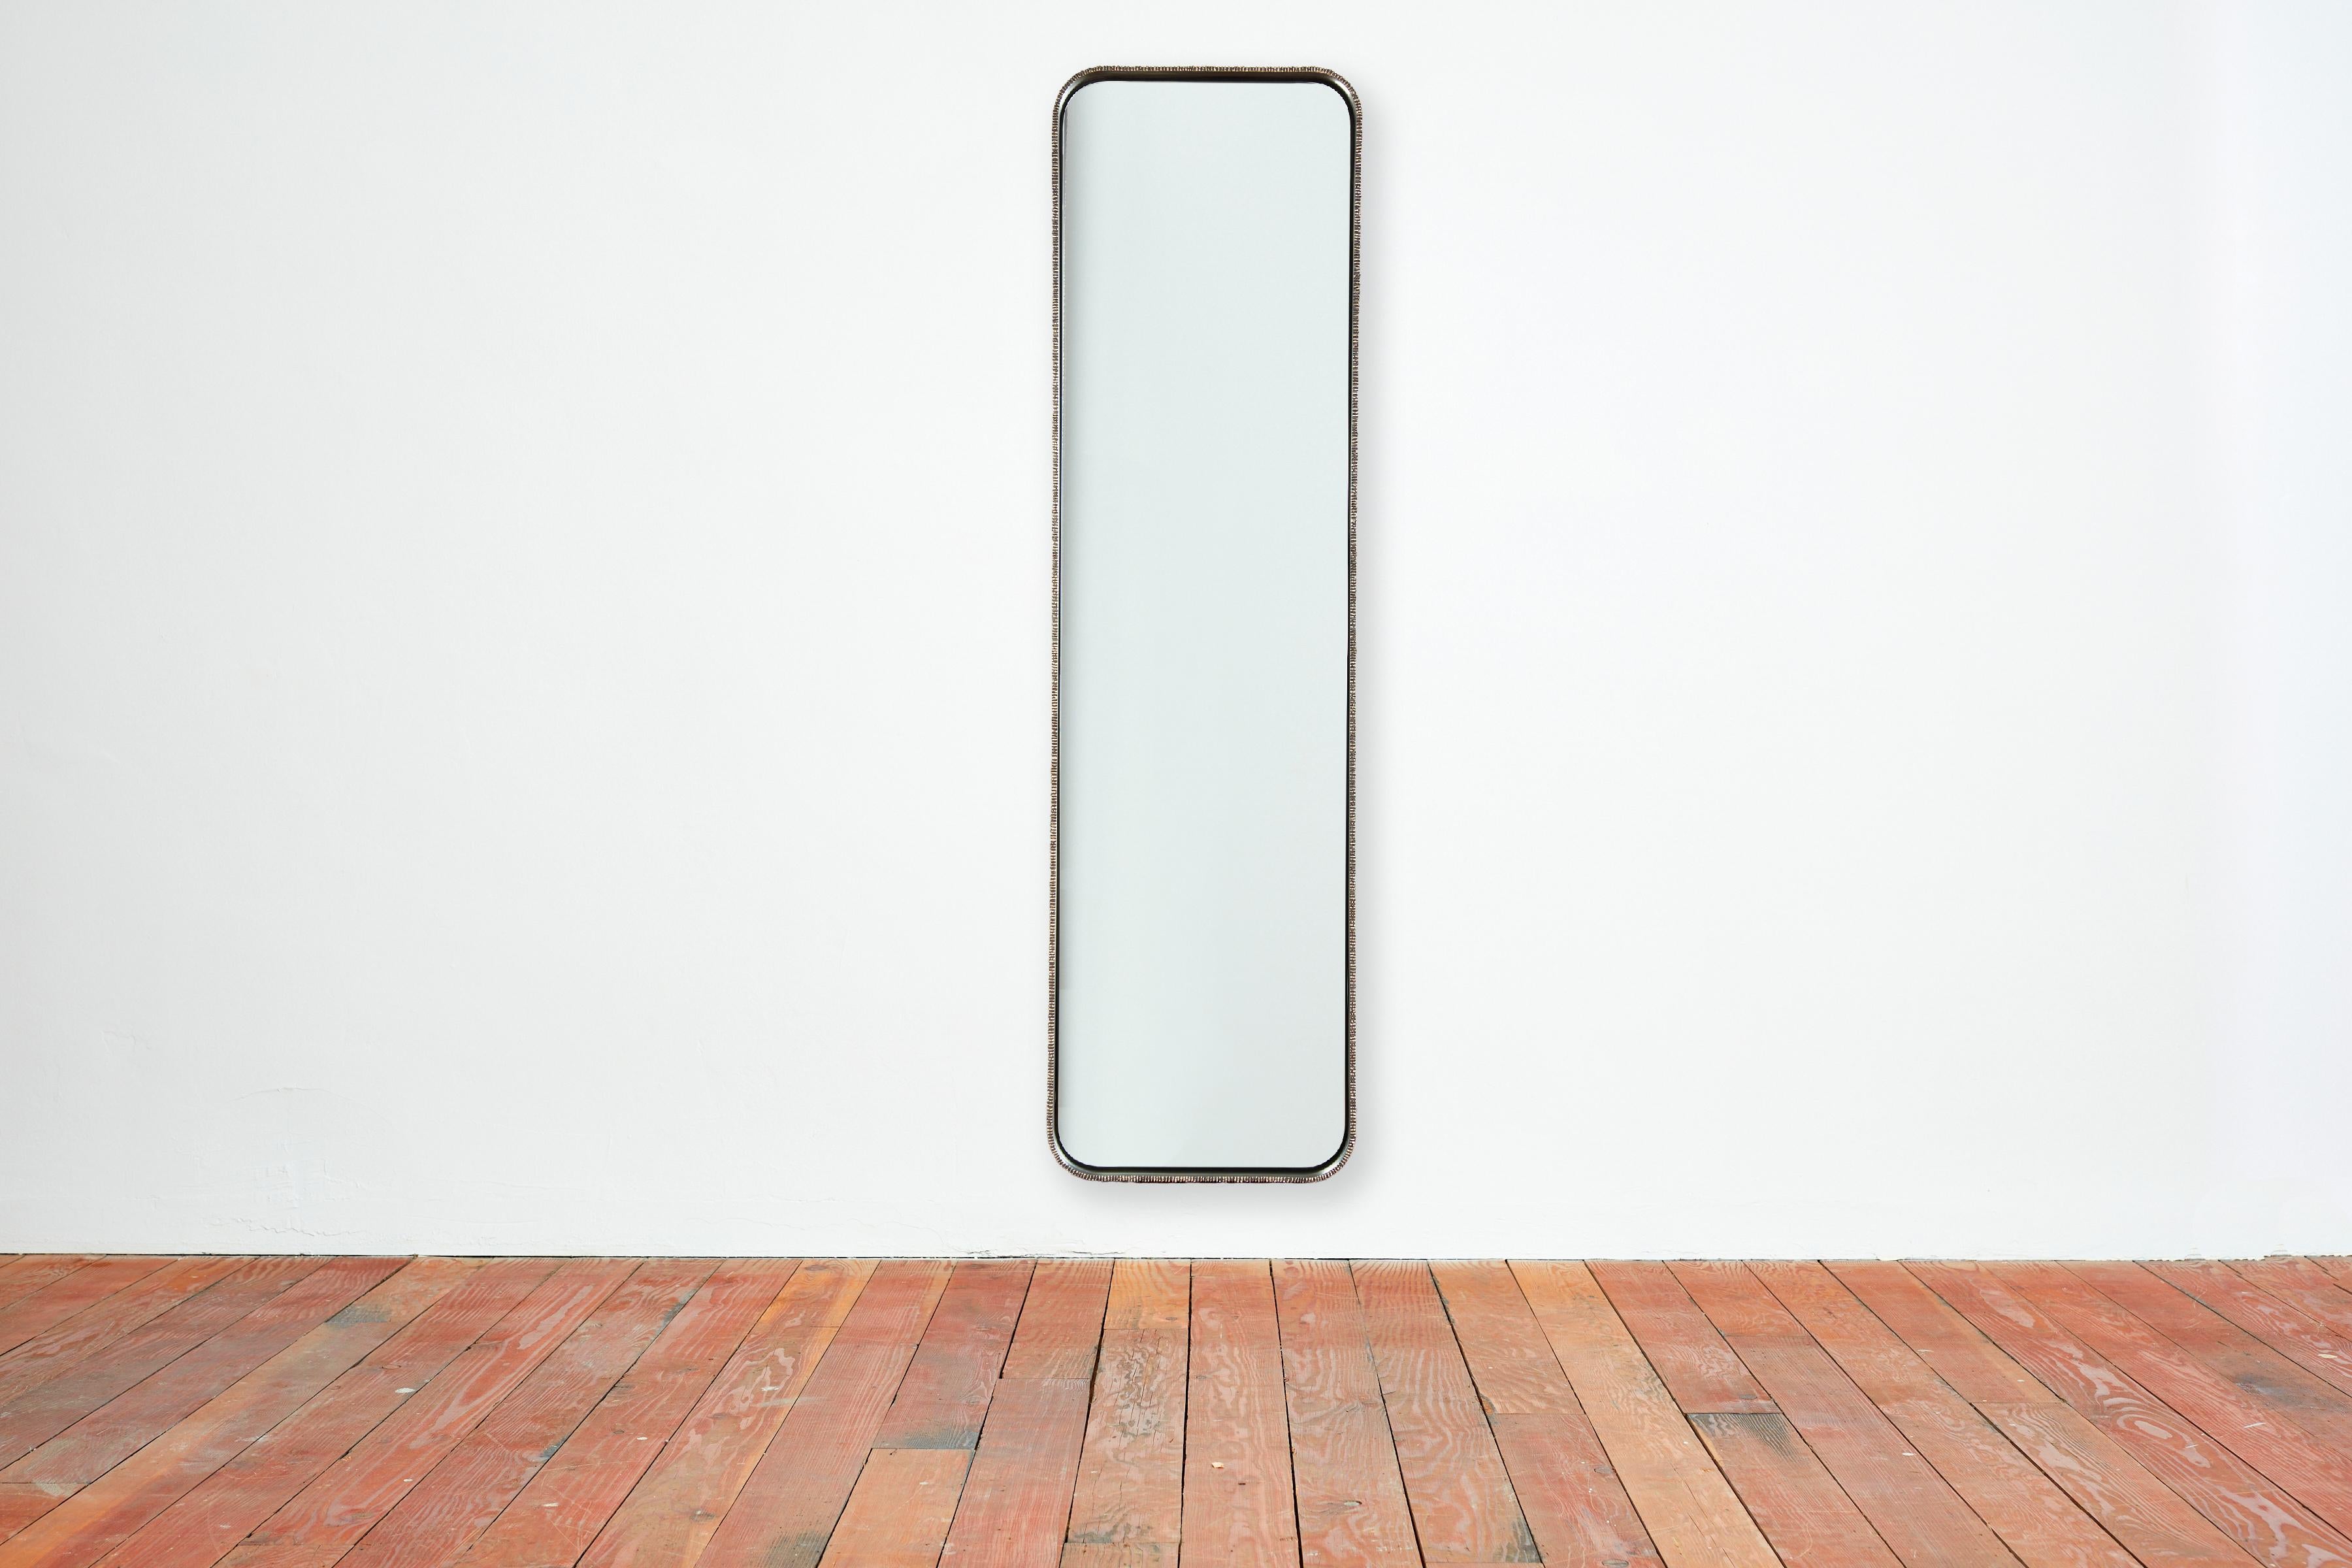 Molten Elongated Mirror by William Emmerson
Dimensions: D 7,6 x W 55,9 x H 203,2 cm.
Materials: Bronze and steel.
 
A mesmerizing luxury mirror that melds steel, bronze and a molten finish. William Emmerson's brilliantly designed 